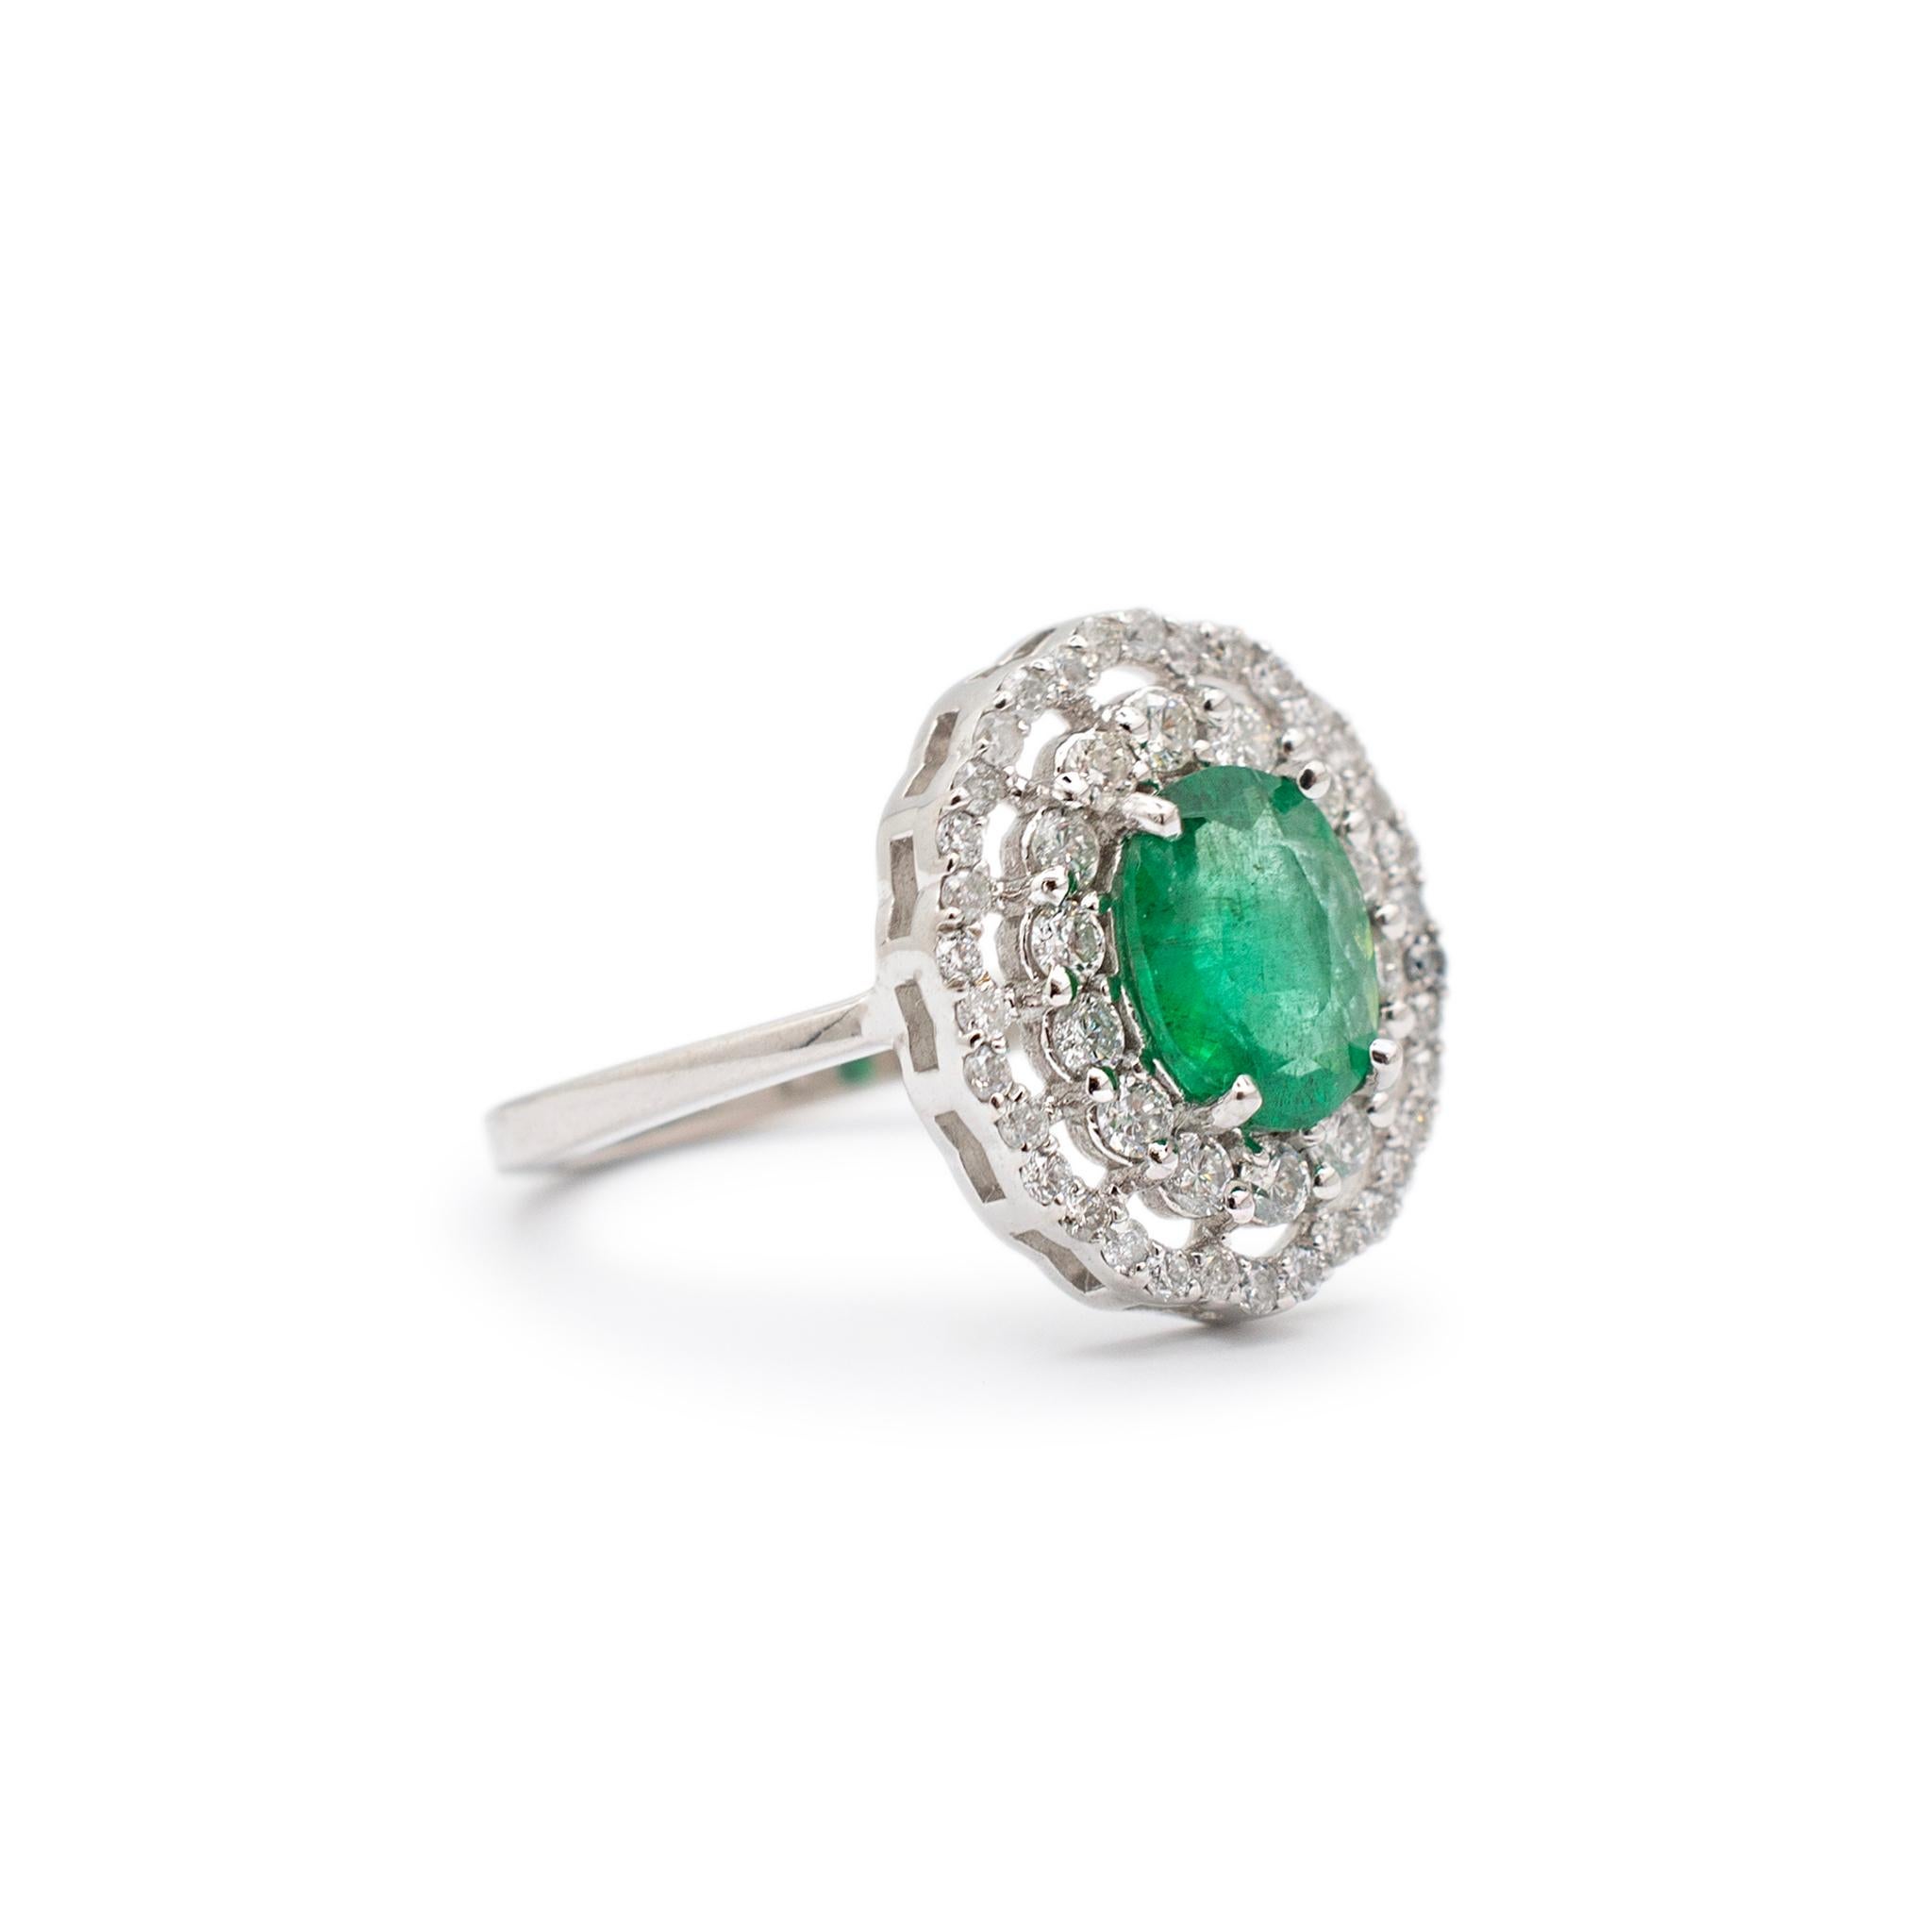 Gender: Ladies

Material Type:18K White Gold

Ring Size: 6.5

Shank width: 2.10mm 

Weight: ﻿4.20 g

Halo Head Measurements: 15.55mm x 13.30mm

Ladies custom made polished rhodium plated 18K white gold, diamond and emerald double-halo, cocktail ring